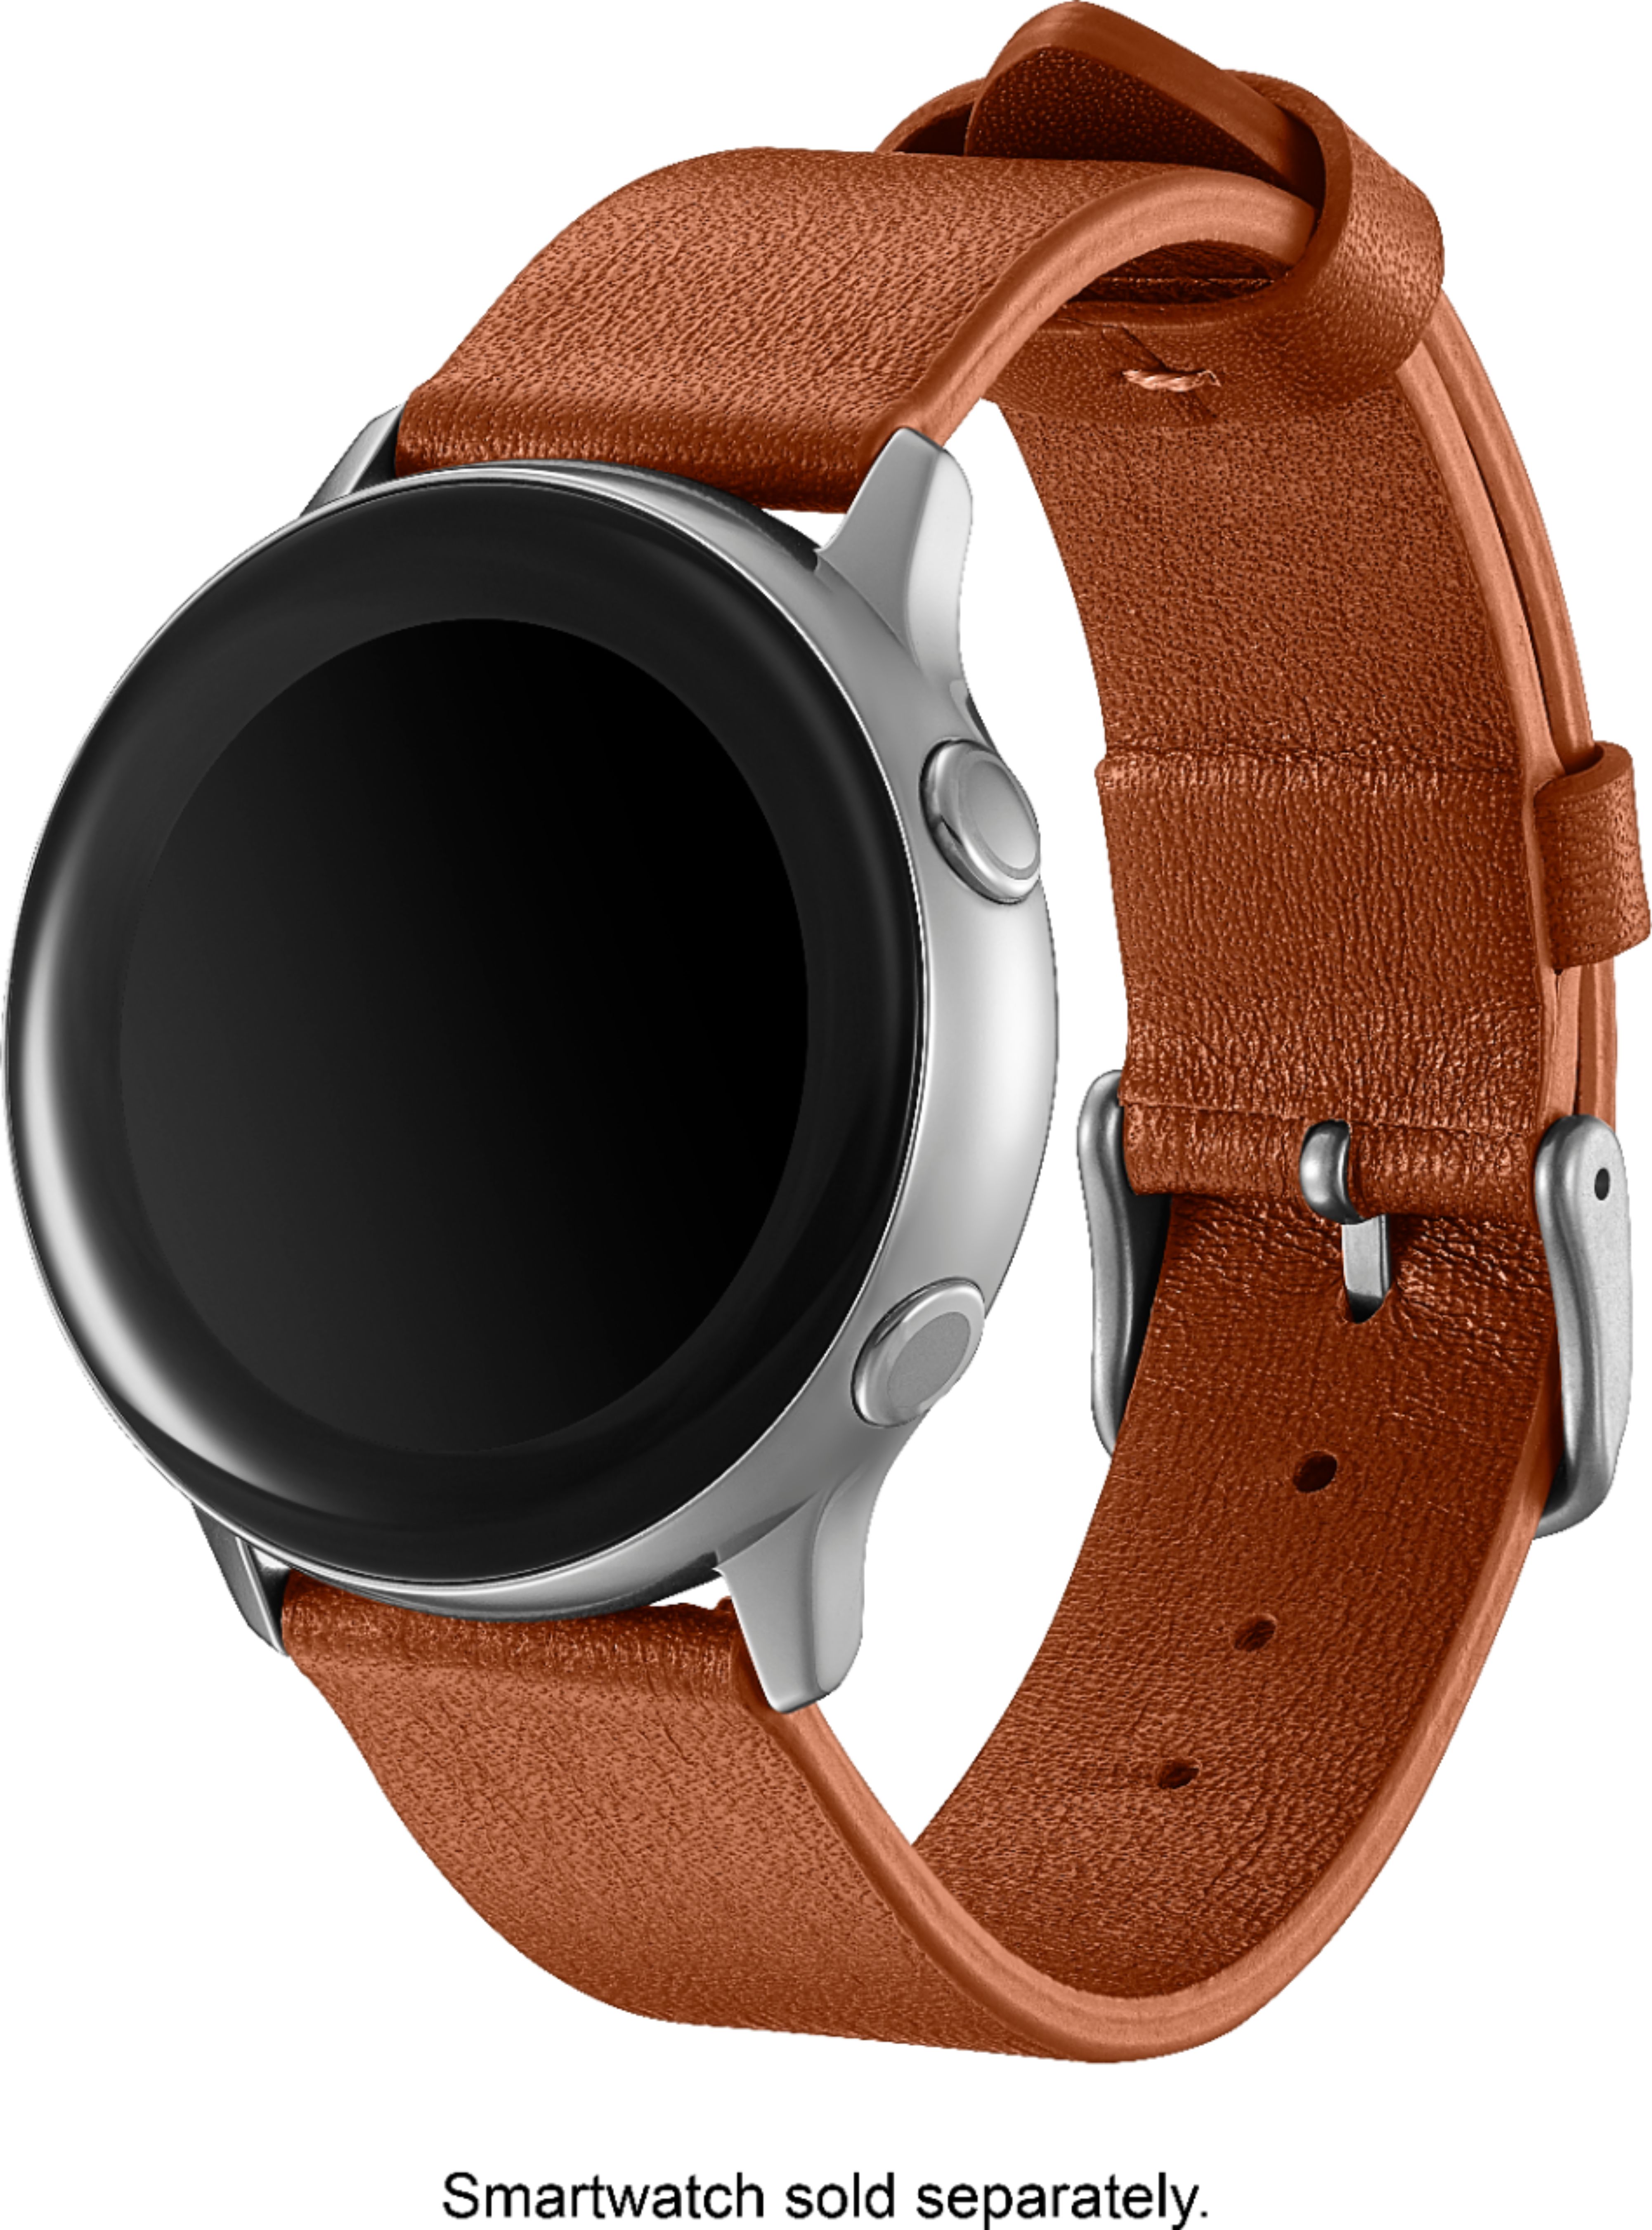 Best Buy: Platinum™ Leather Watch Band for Samsung Galaxy Watch